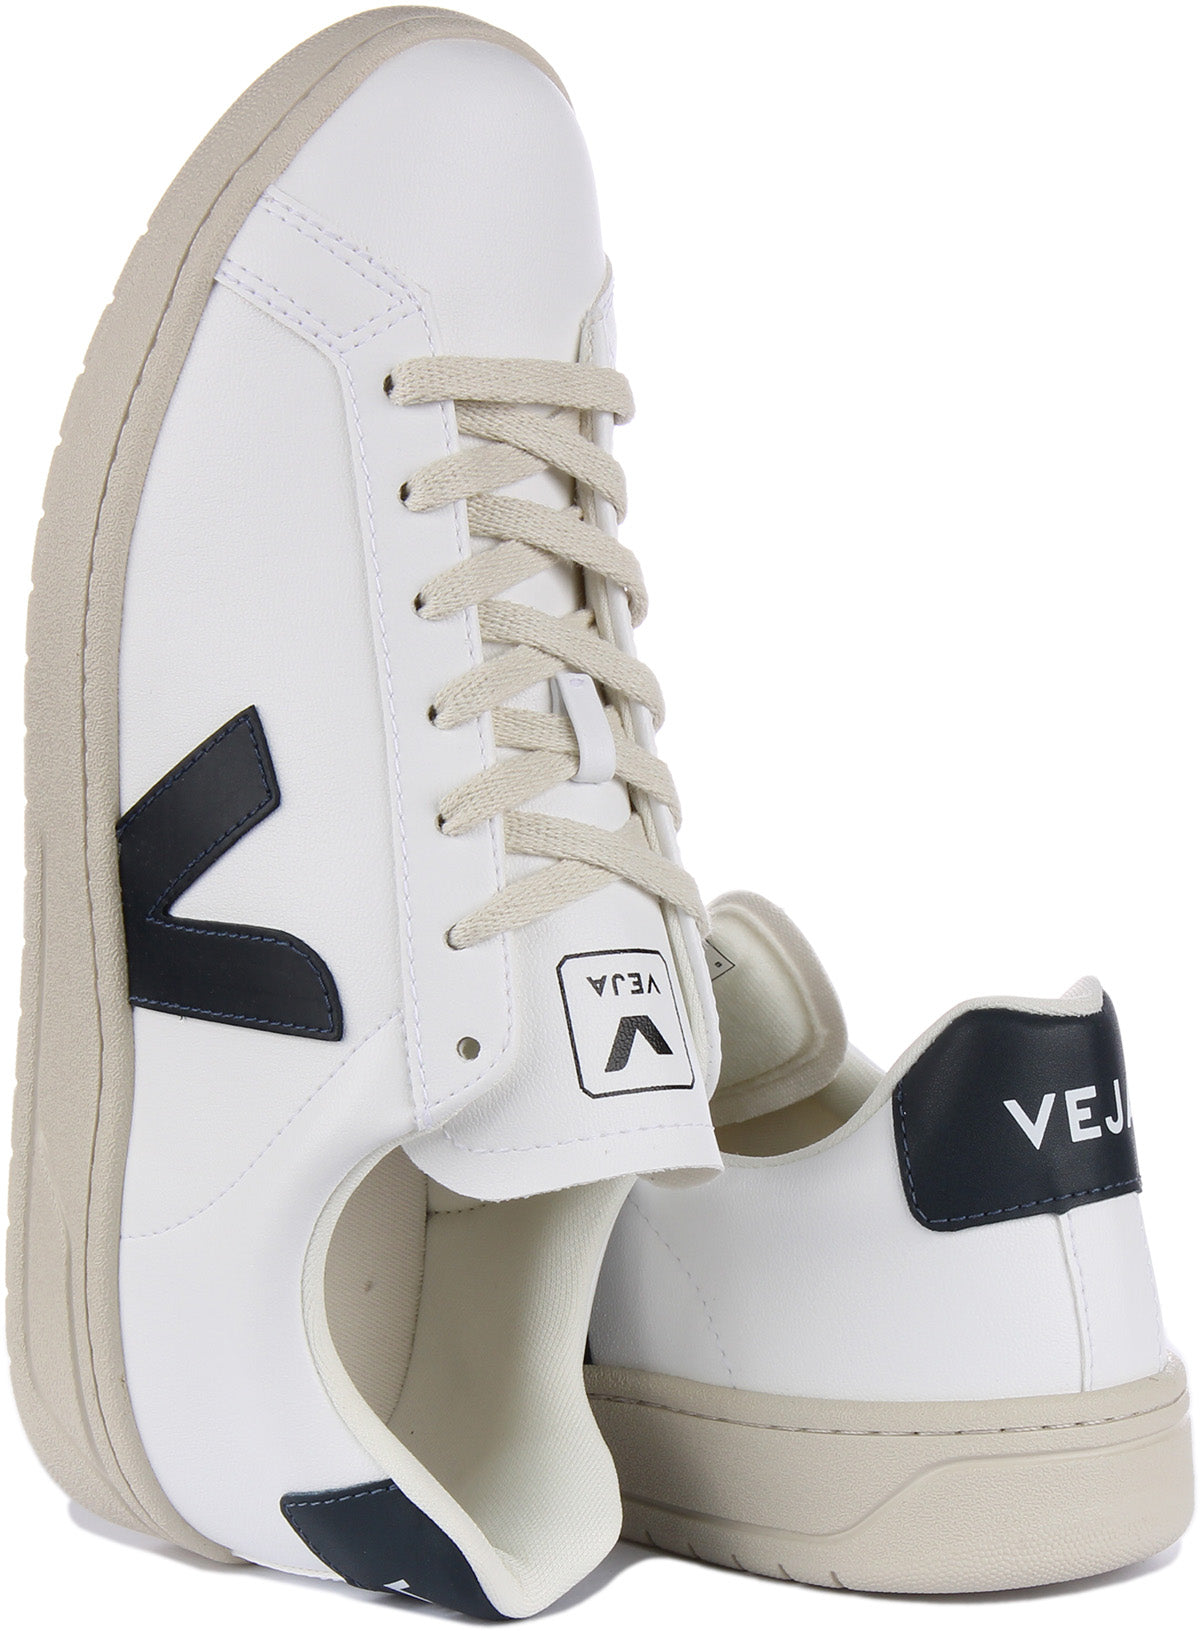 Veja Urca Cwl In White Navy For Women | Lace up Casual Trainers